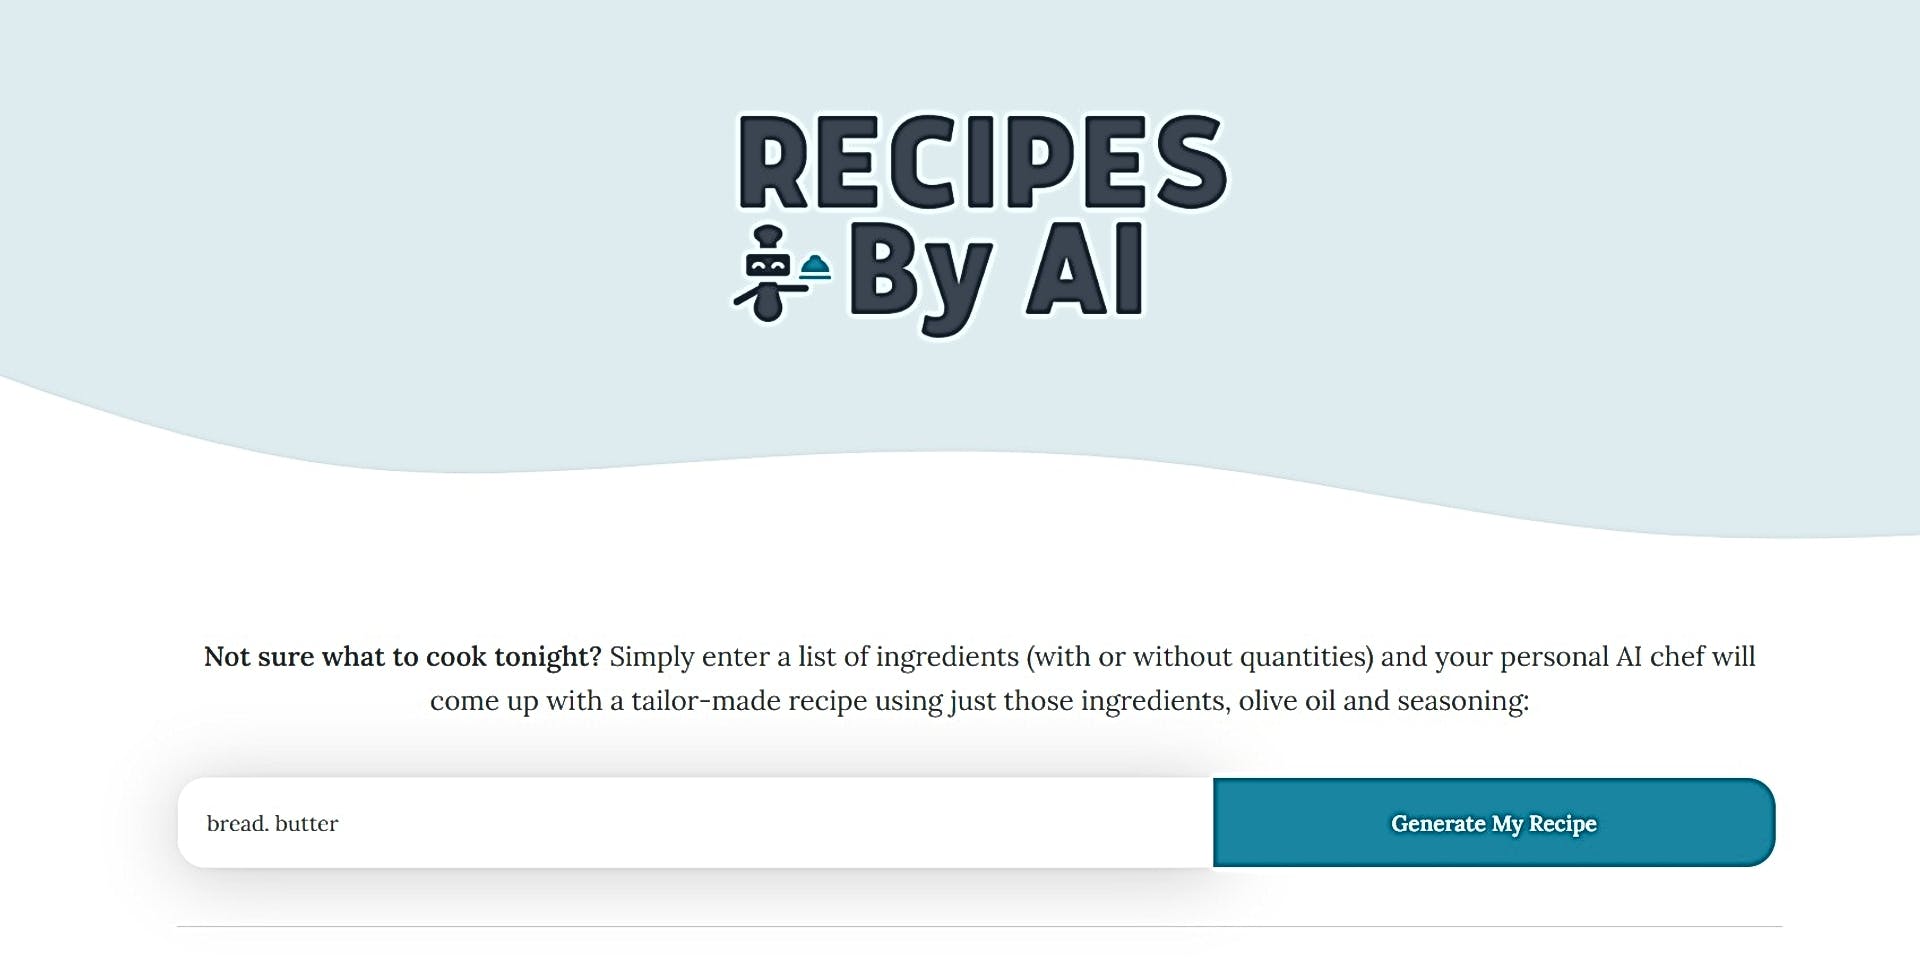 Recipes By AI featured